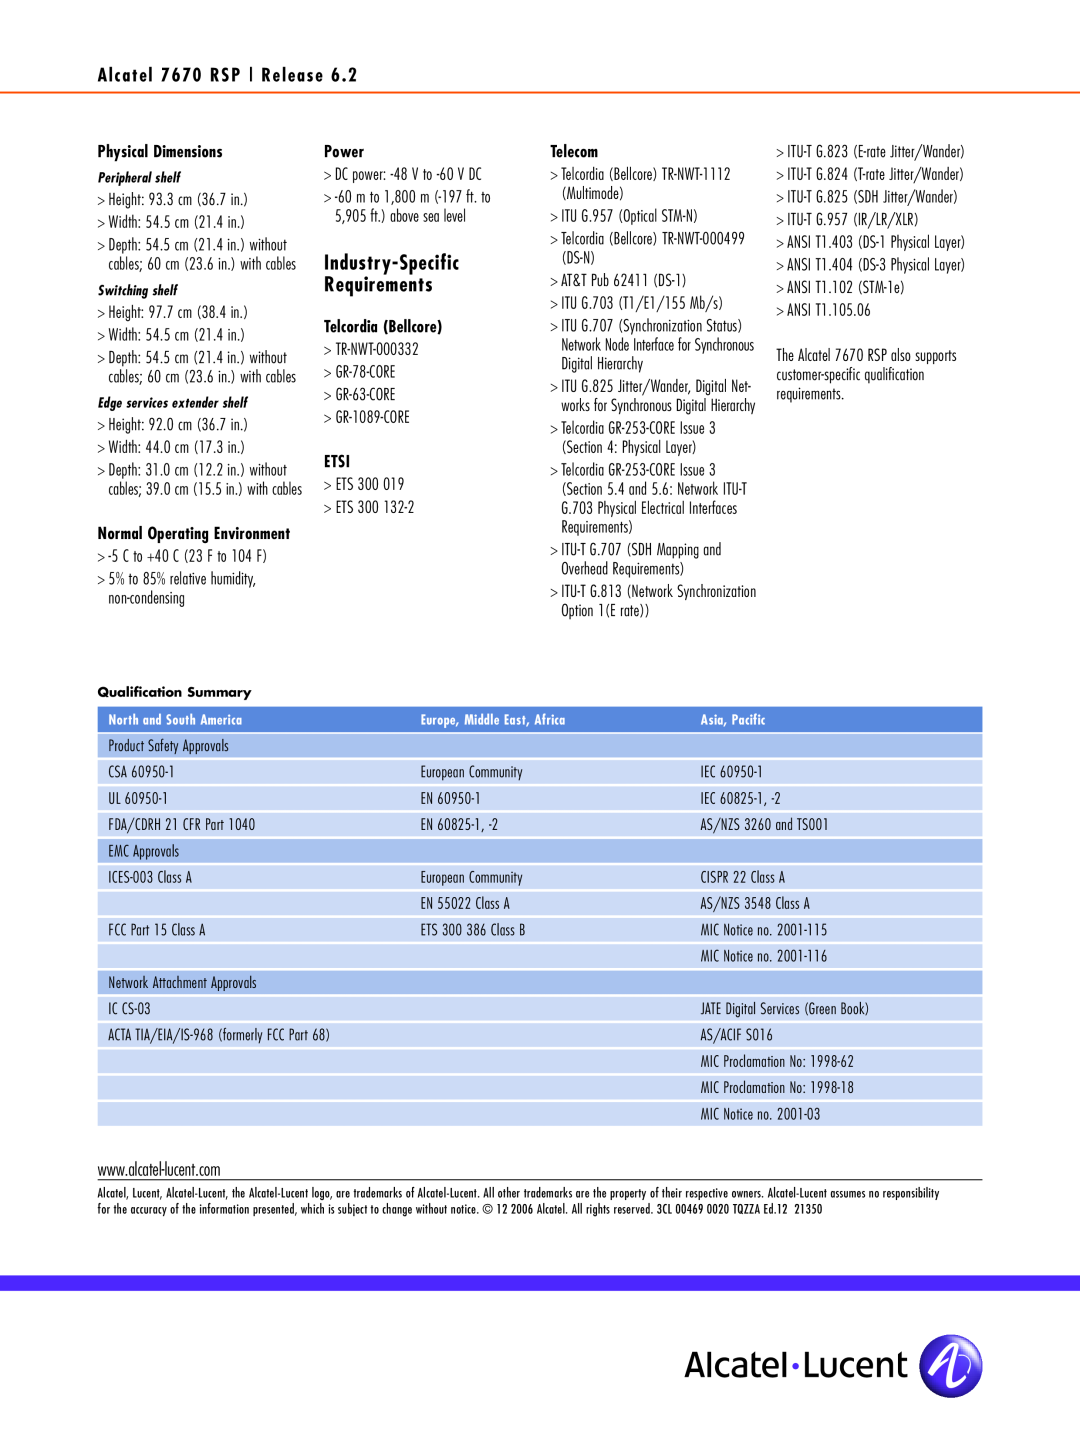 Alcatel-Lucent 7670 RSP manual Physical Dimensions, Power, Industry-Specific Requirements Telcordia Bellcore, Etsi, Telecom 